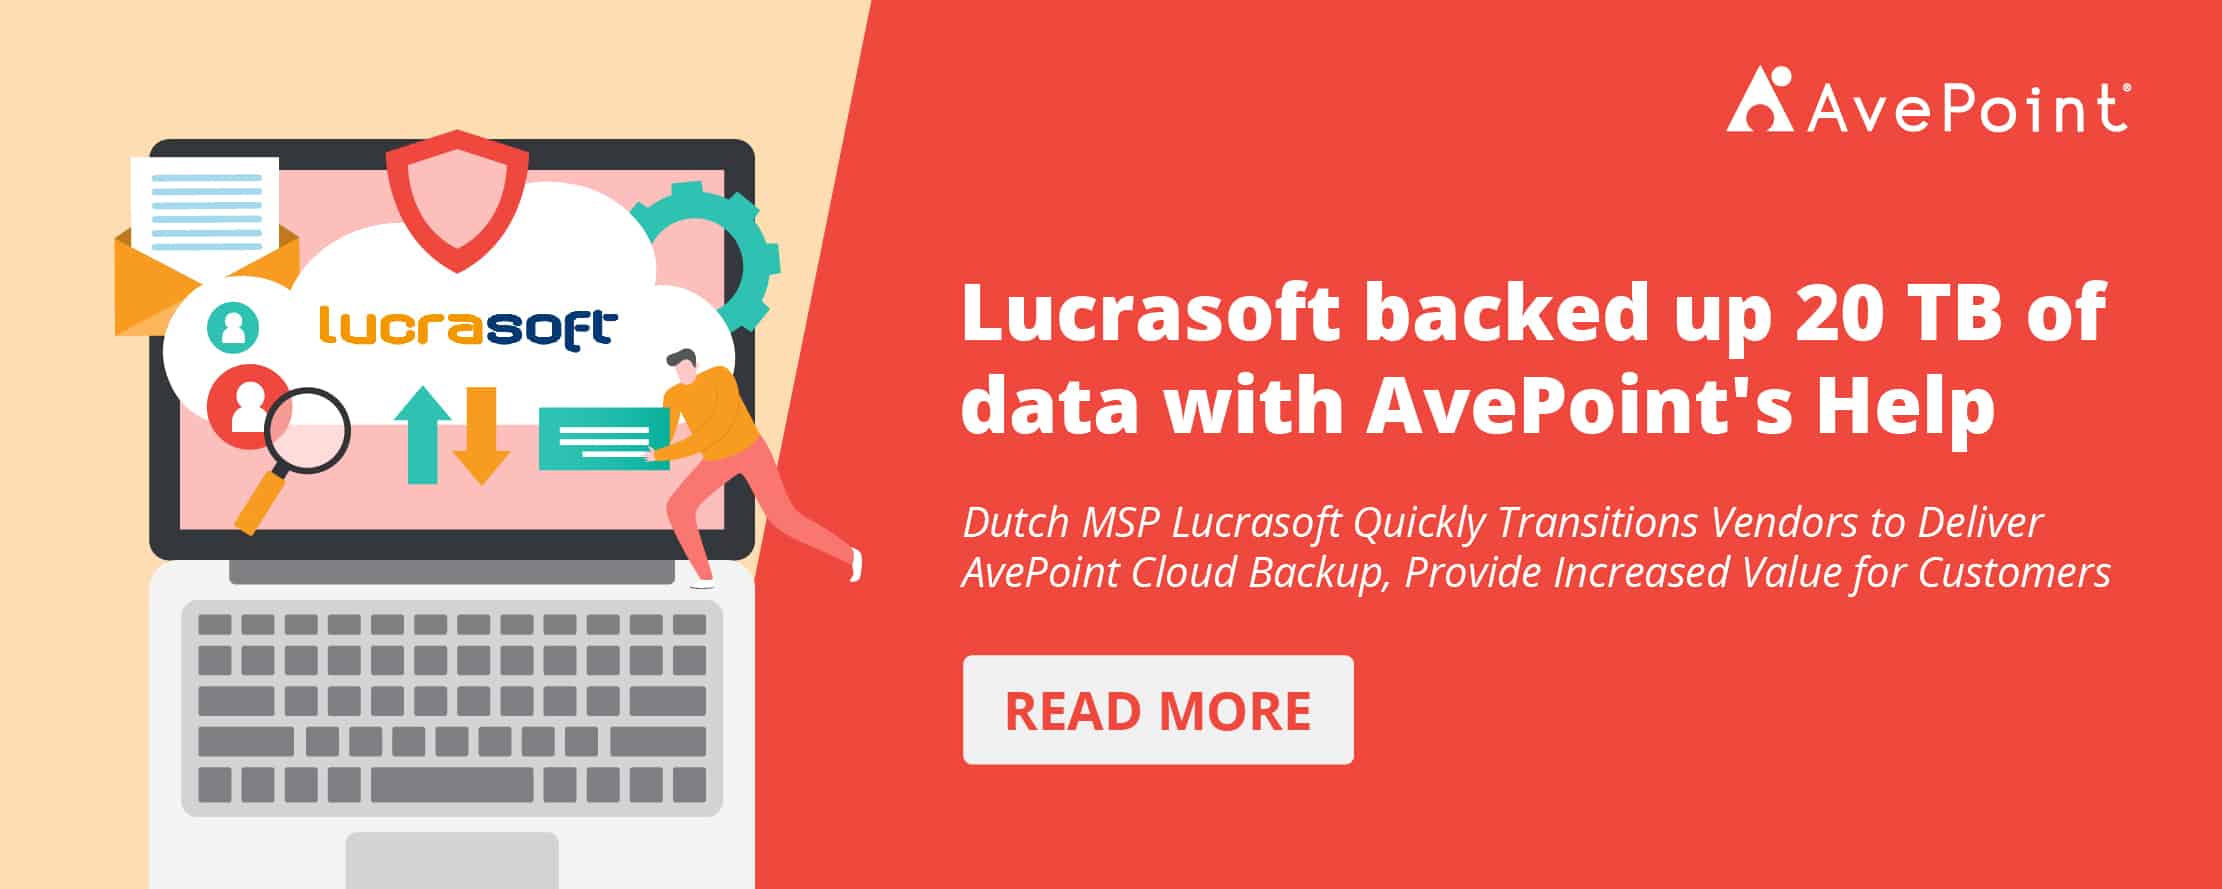 Lucrasoft-backed-up-20-TB-of-data-with-AvePoint's-Help-SaaS-management